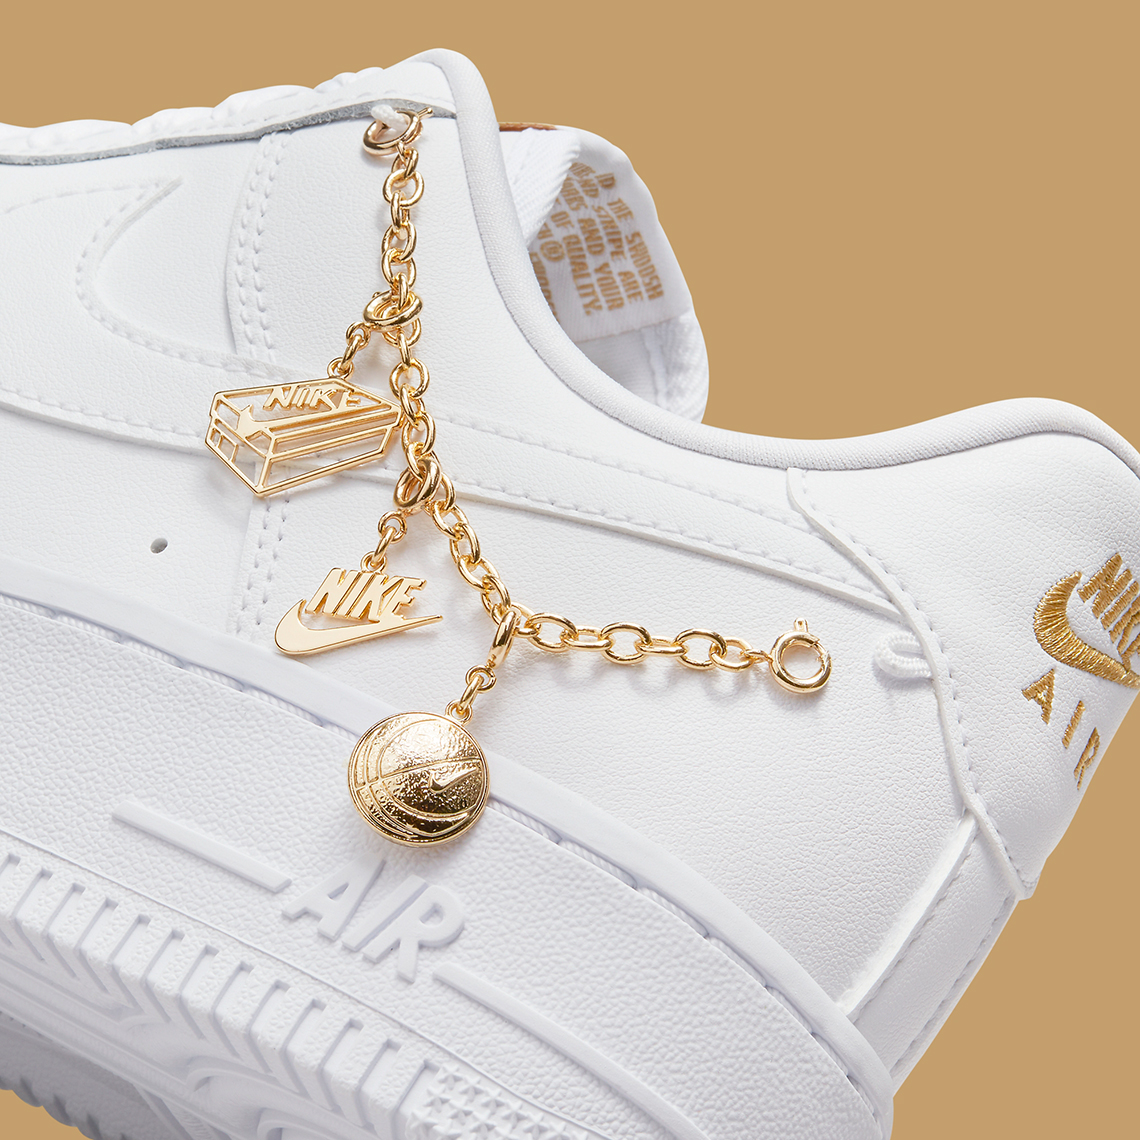 Nike Air Force 1 Low White Metallic Gold Gold Charms Dd1525 100 6